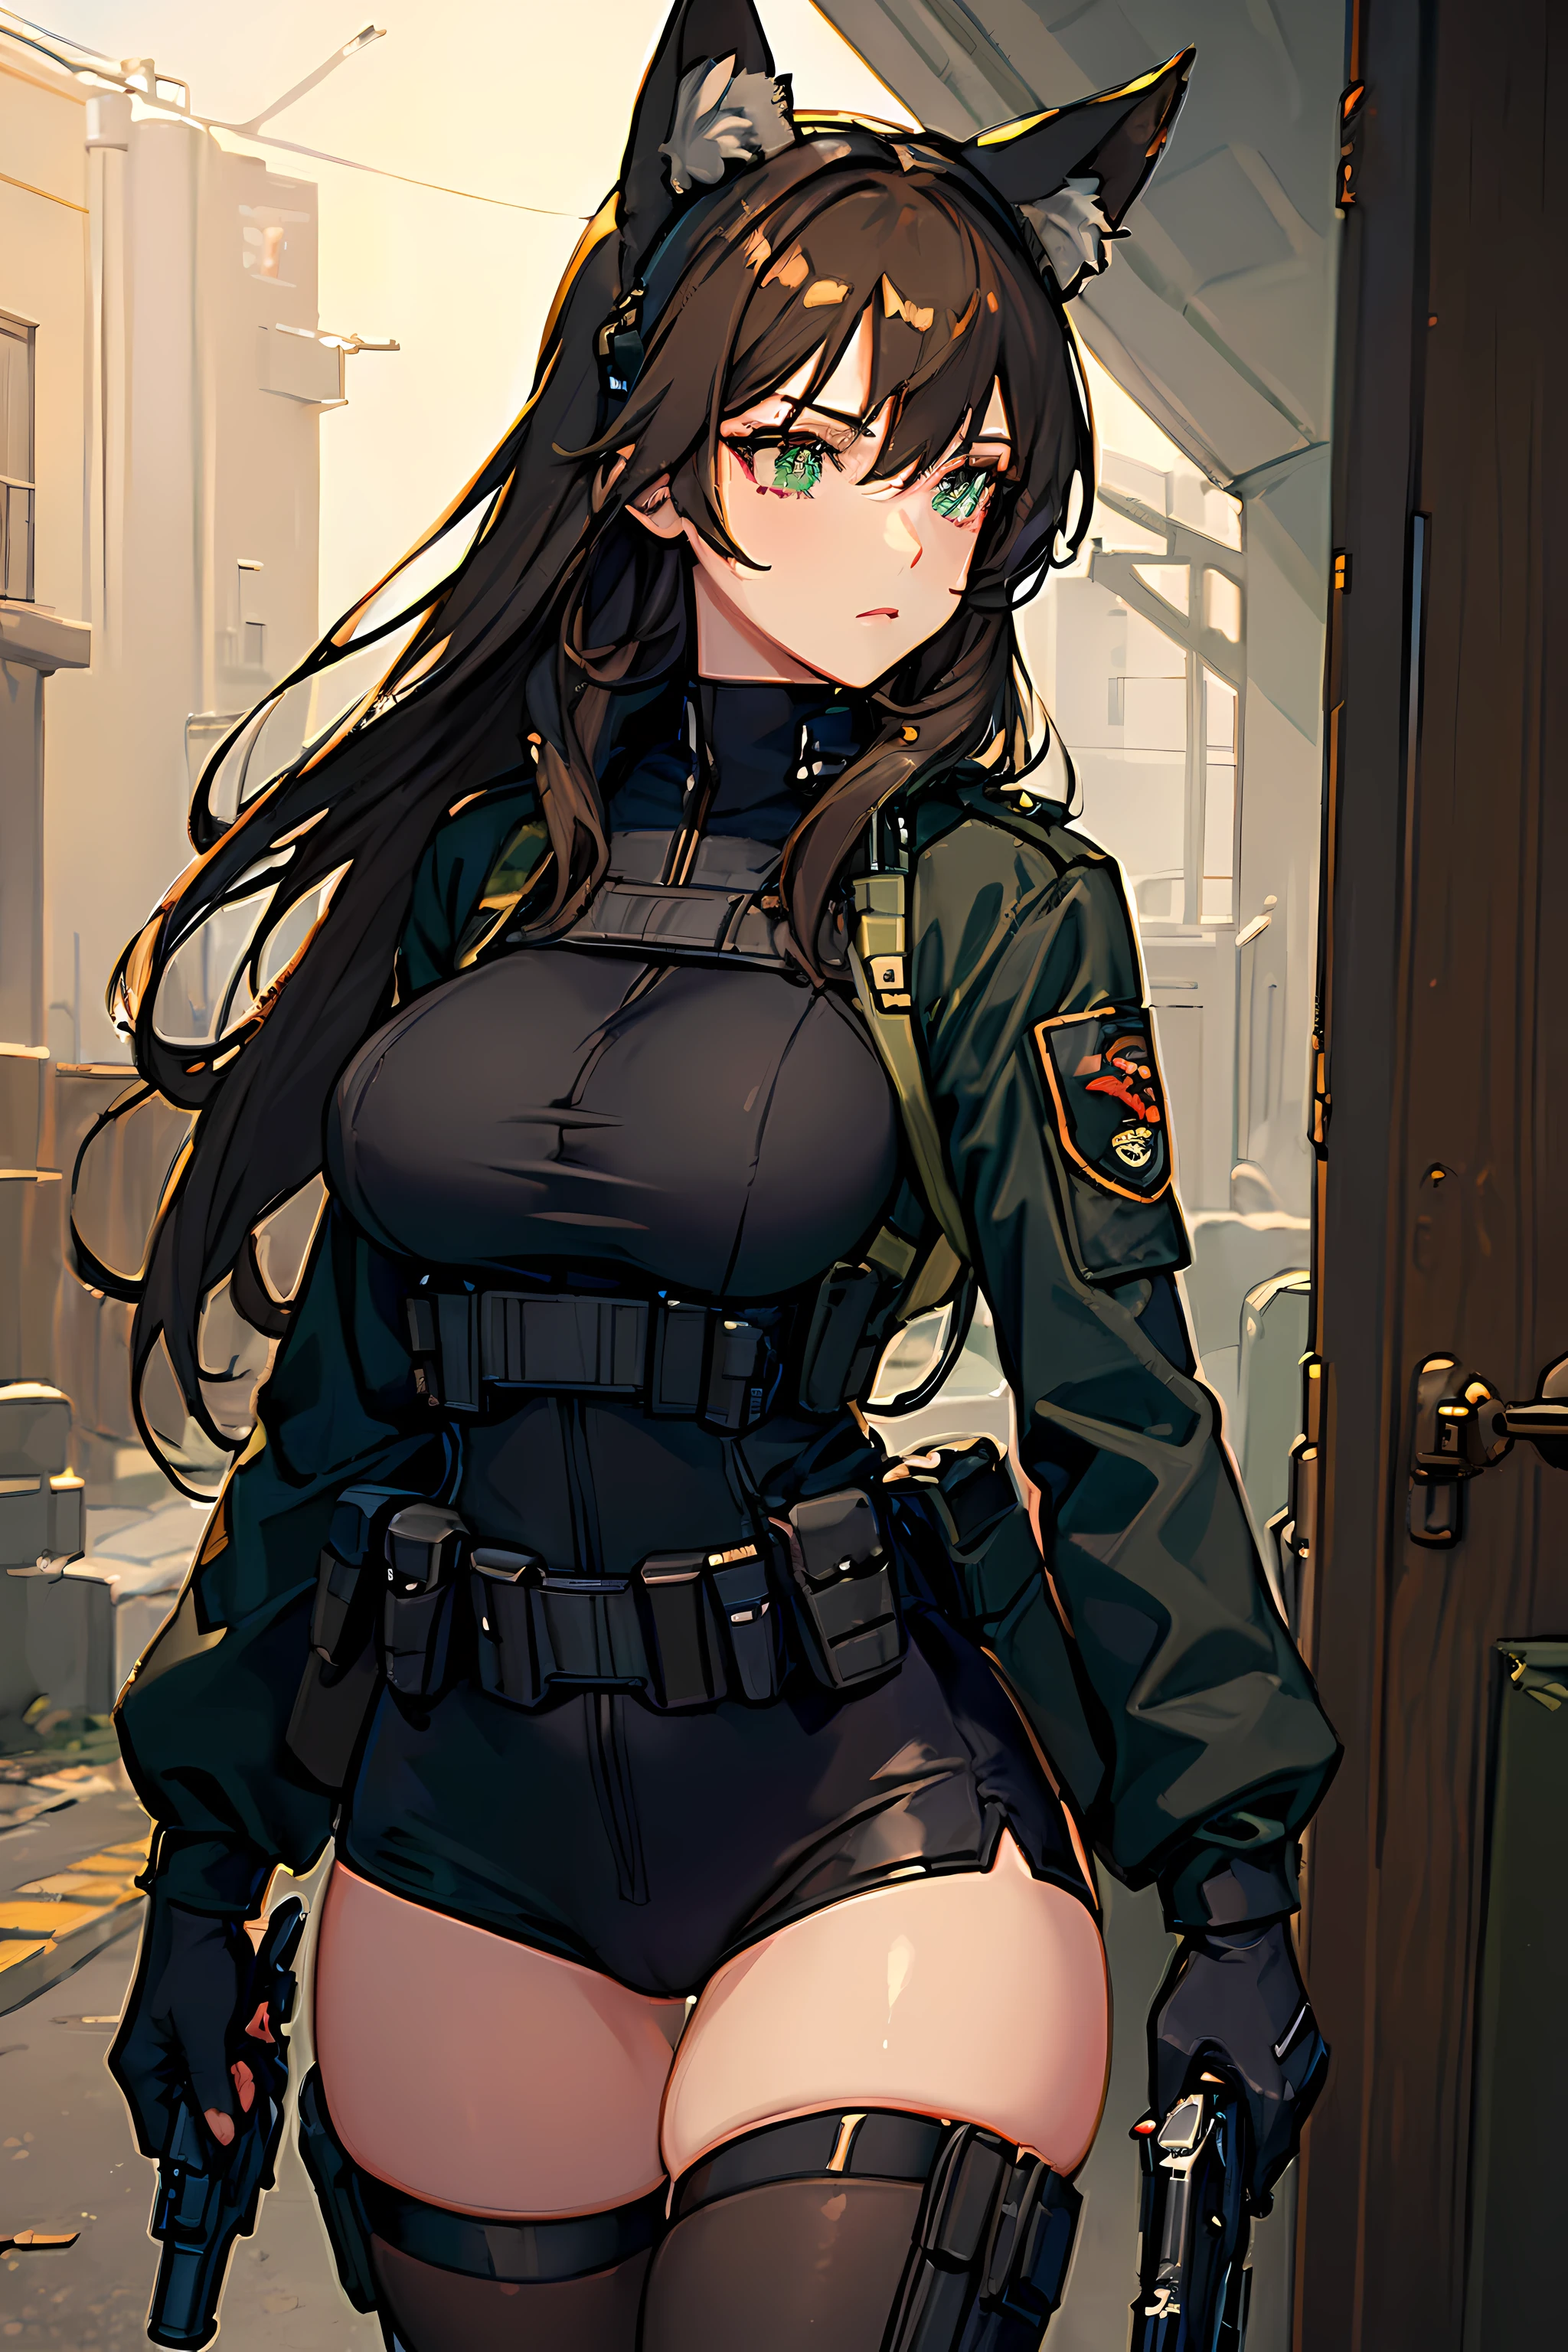 (Masterpiece: 1.5), (Best Quality: 1.5), (Perfect Eyes), (Perfect Face), 1 Woman, Mature Woman, Fox ears, Fox tail, green eyes, dark brown hair, big breasts, tactical gear, gun, spandex black shorts, tactical jacket, headset, gloves,